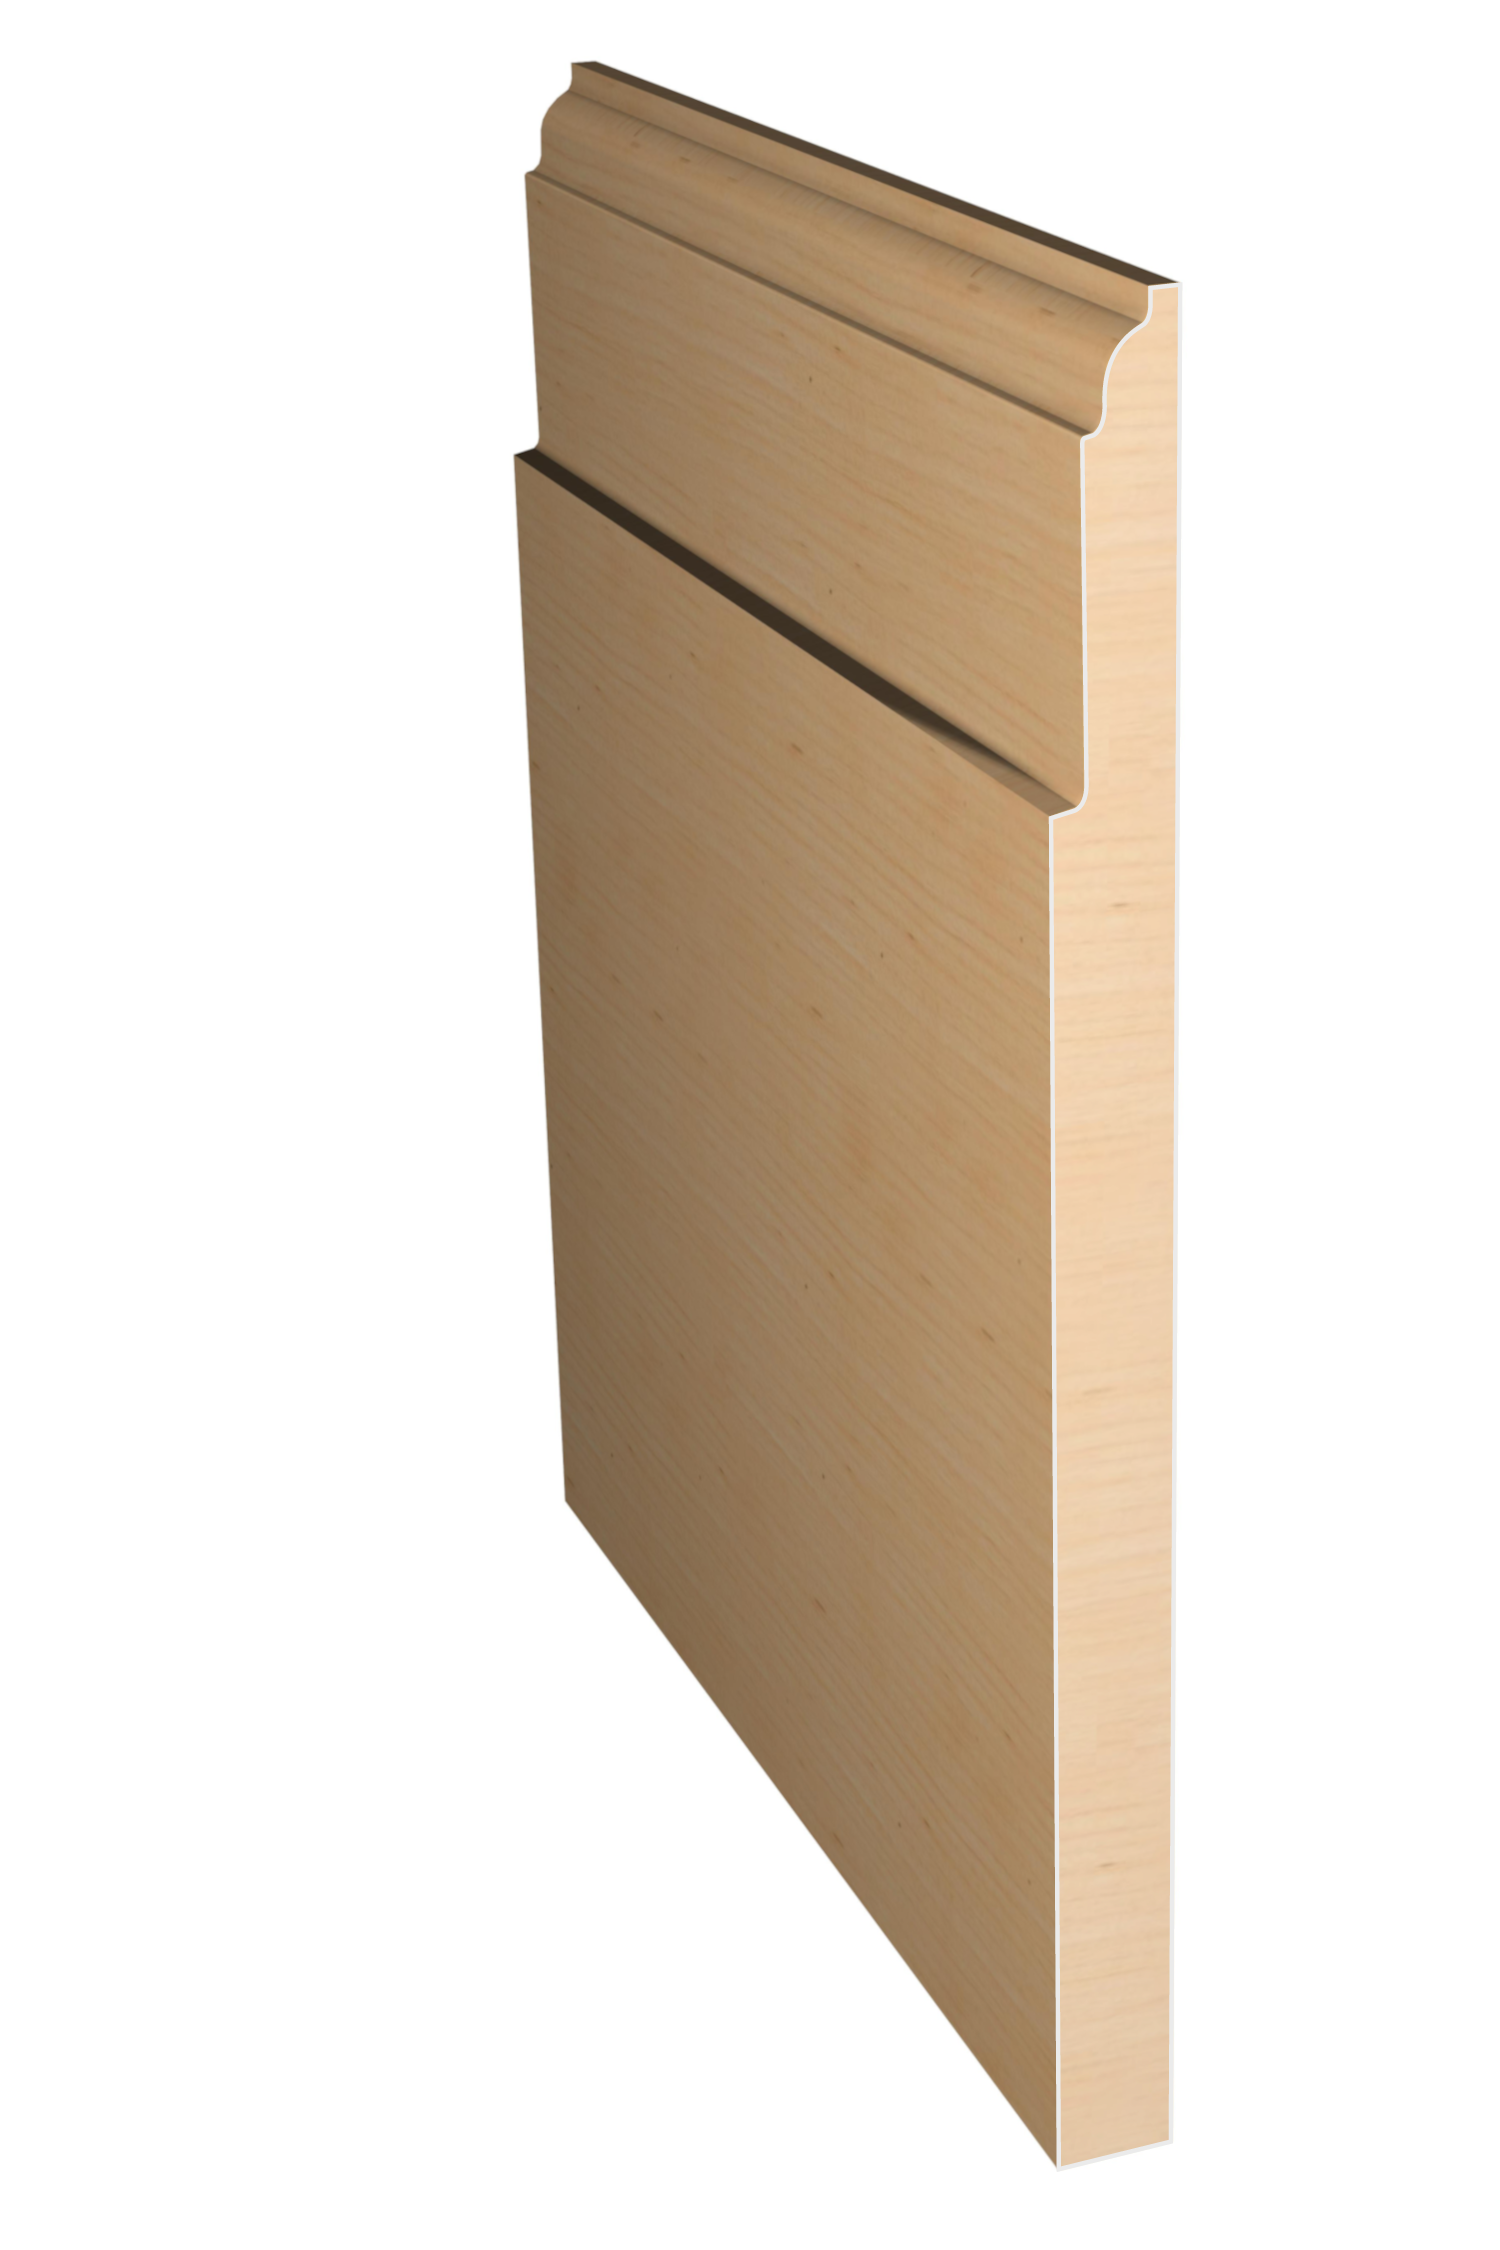 Three dimensional rendering of custom base wood molding BAPL7126 made by Public Lumber Company in Detroit.